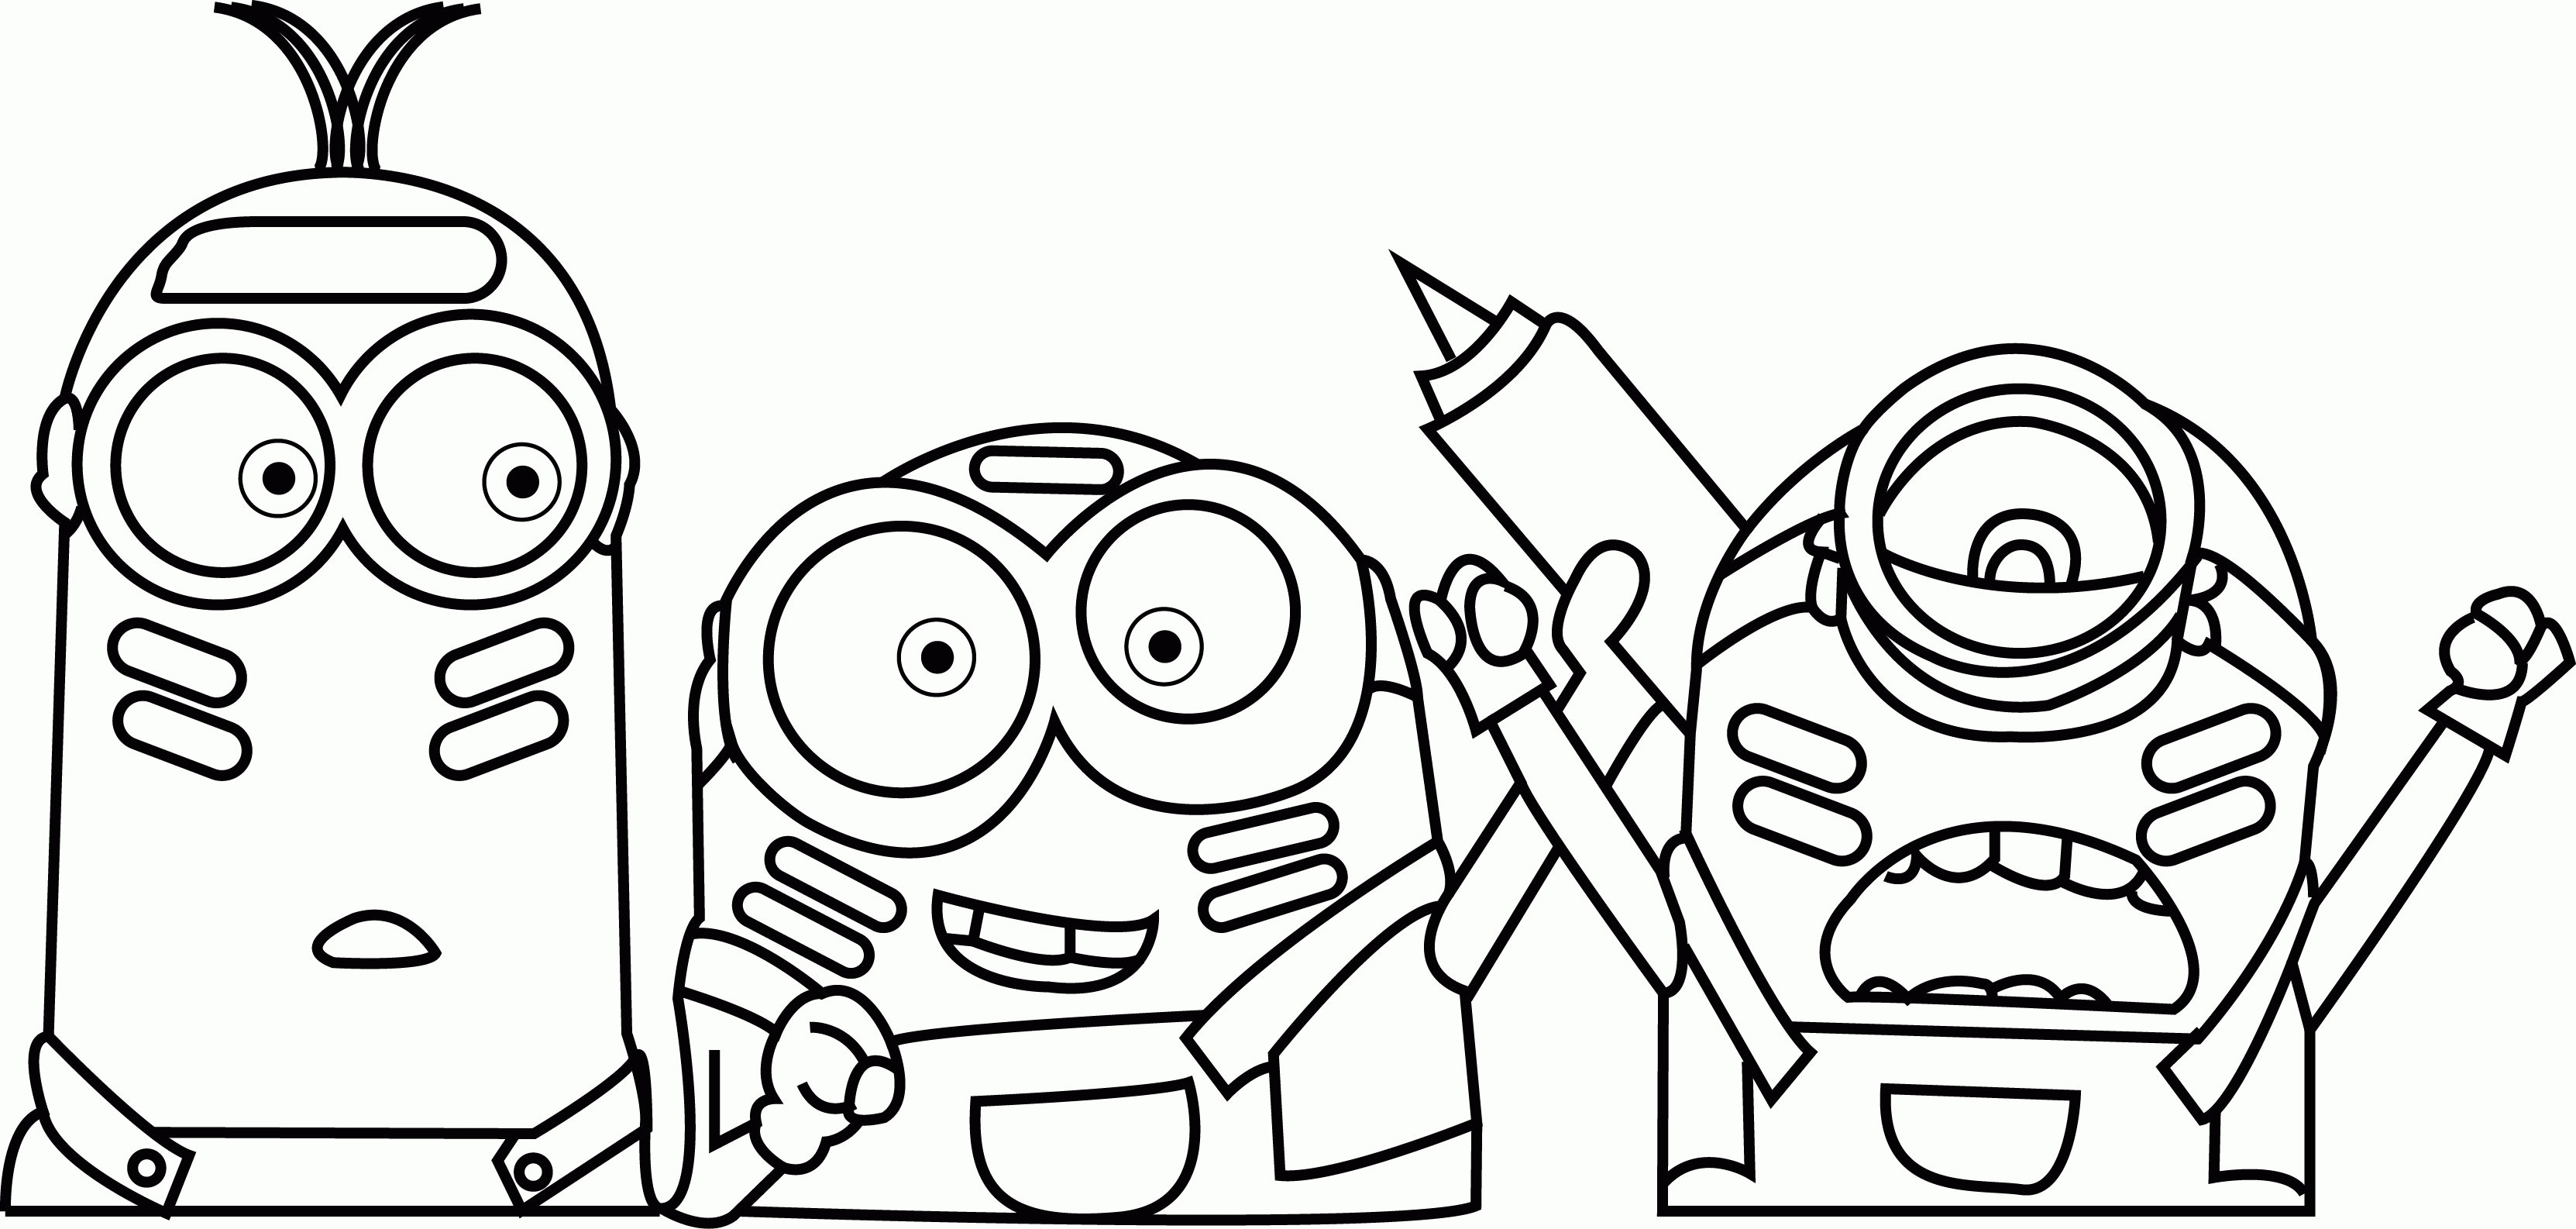 Minions Color War Coloring Page | Wecoloringpage